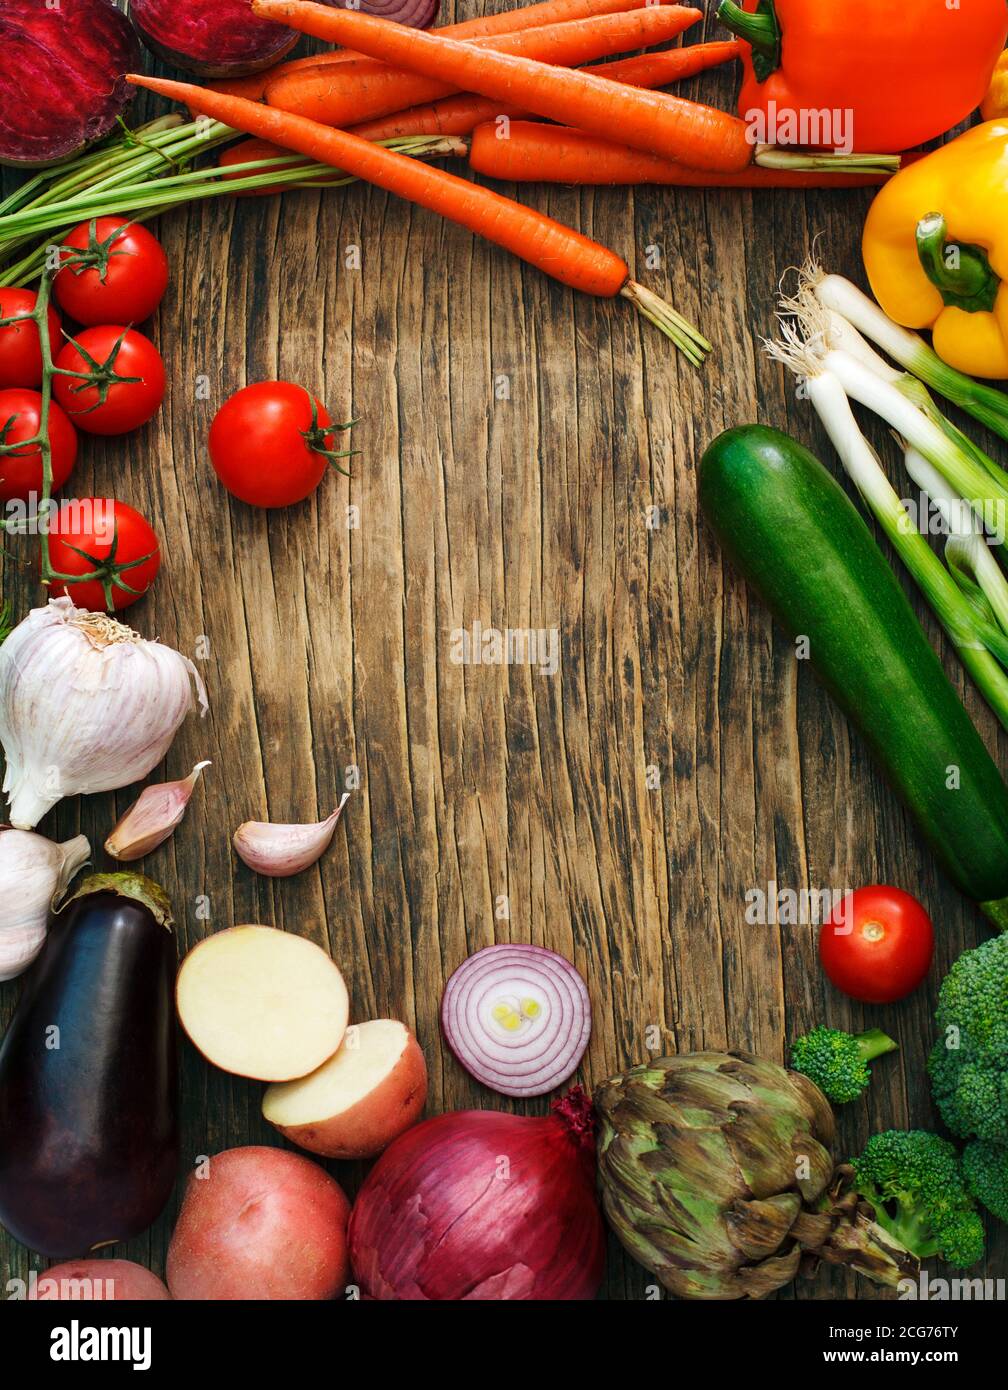 Fresh fruit and vegetables on a wooden table Stock Photo